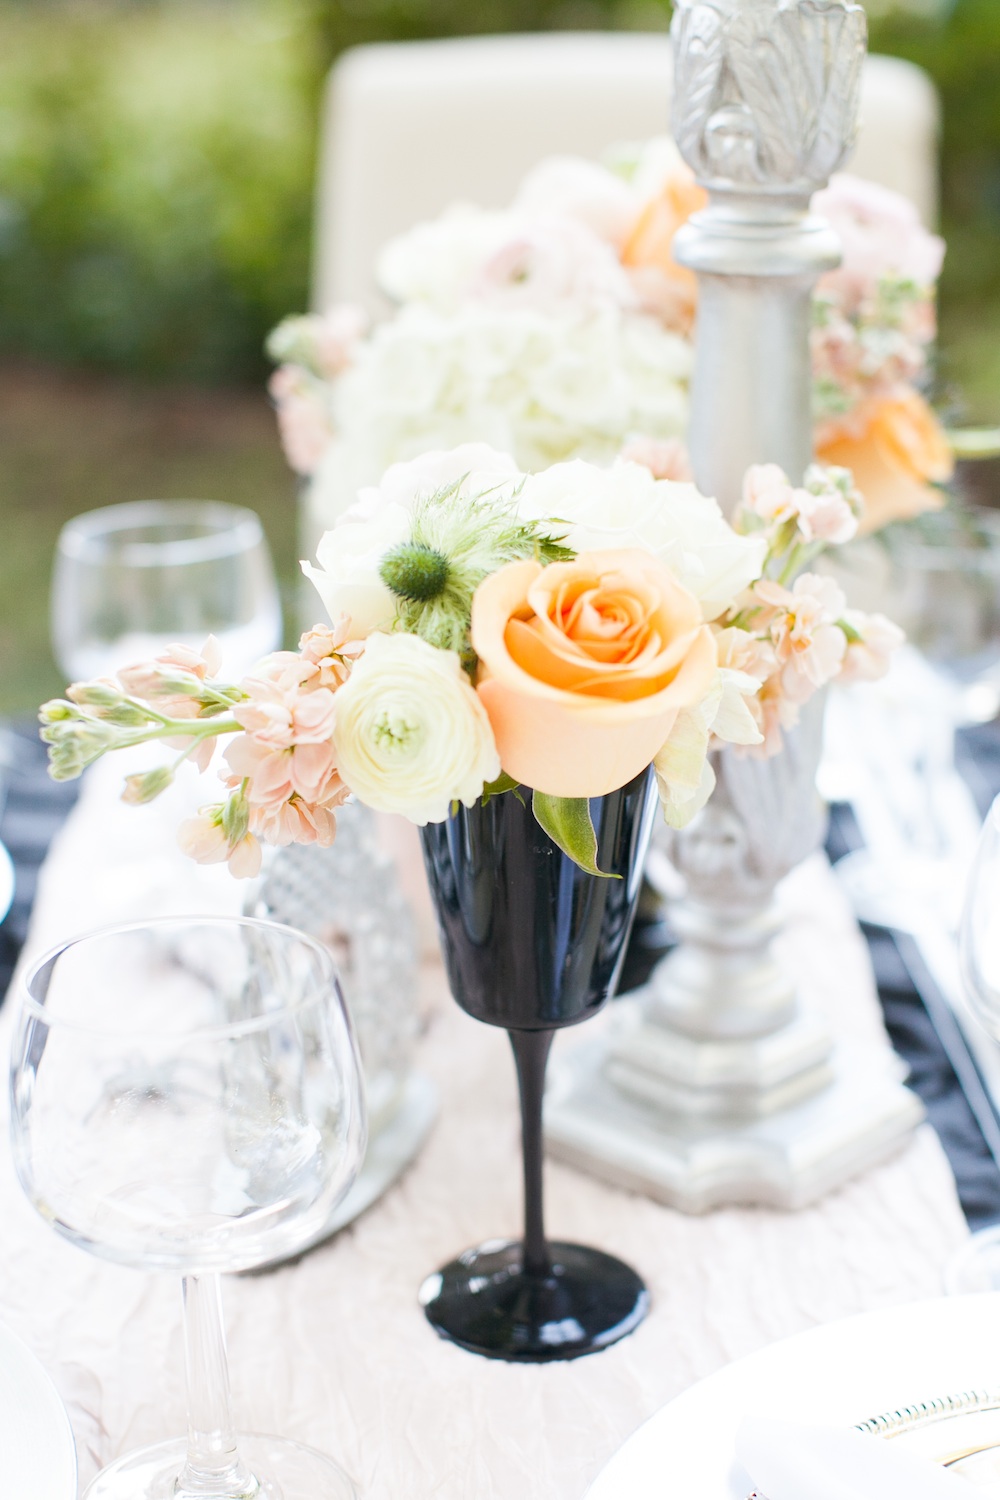  Elegant Halloween Wedding Tablescape in Blush, Black and Tangerine / florals by EightTreeStreet / photo by {a}strid Photography 